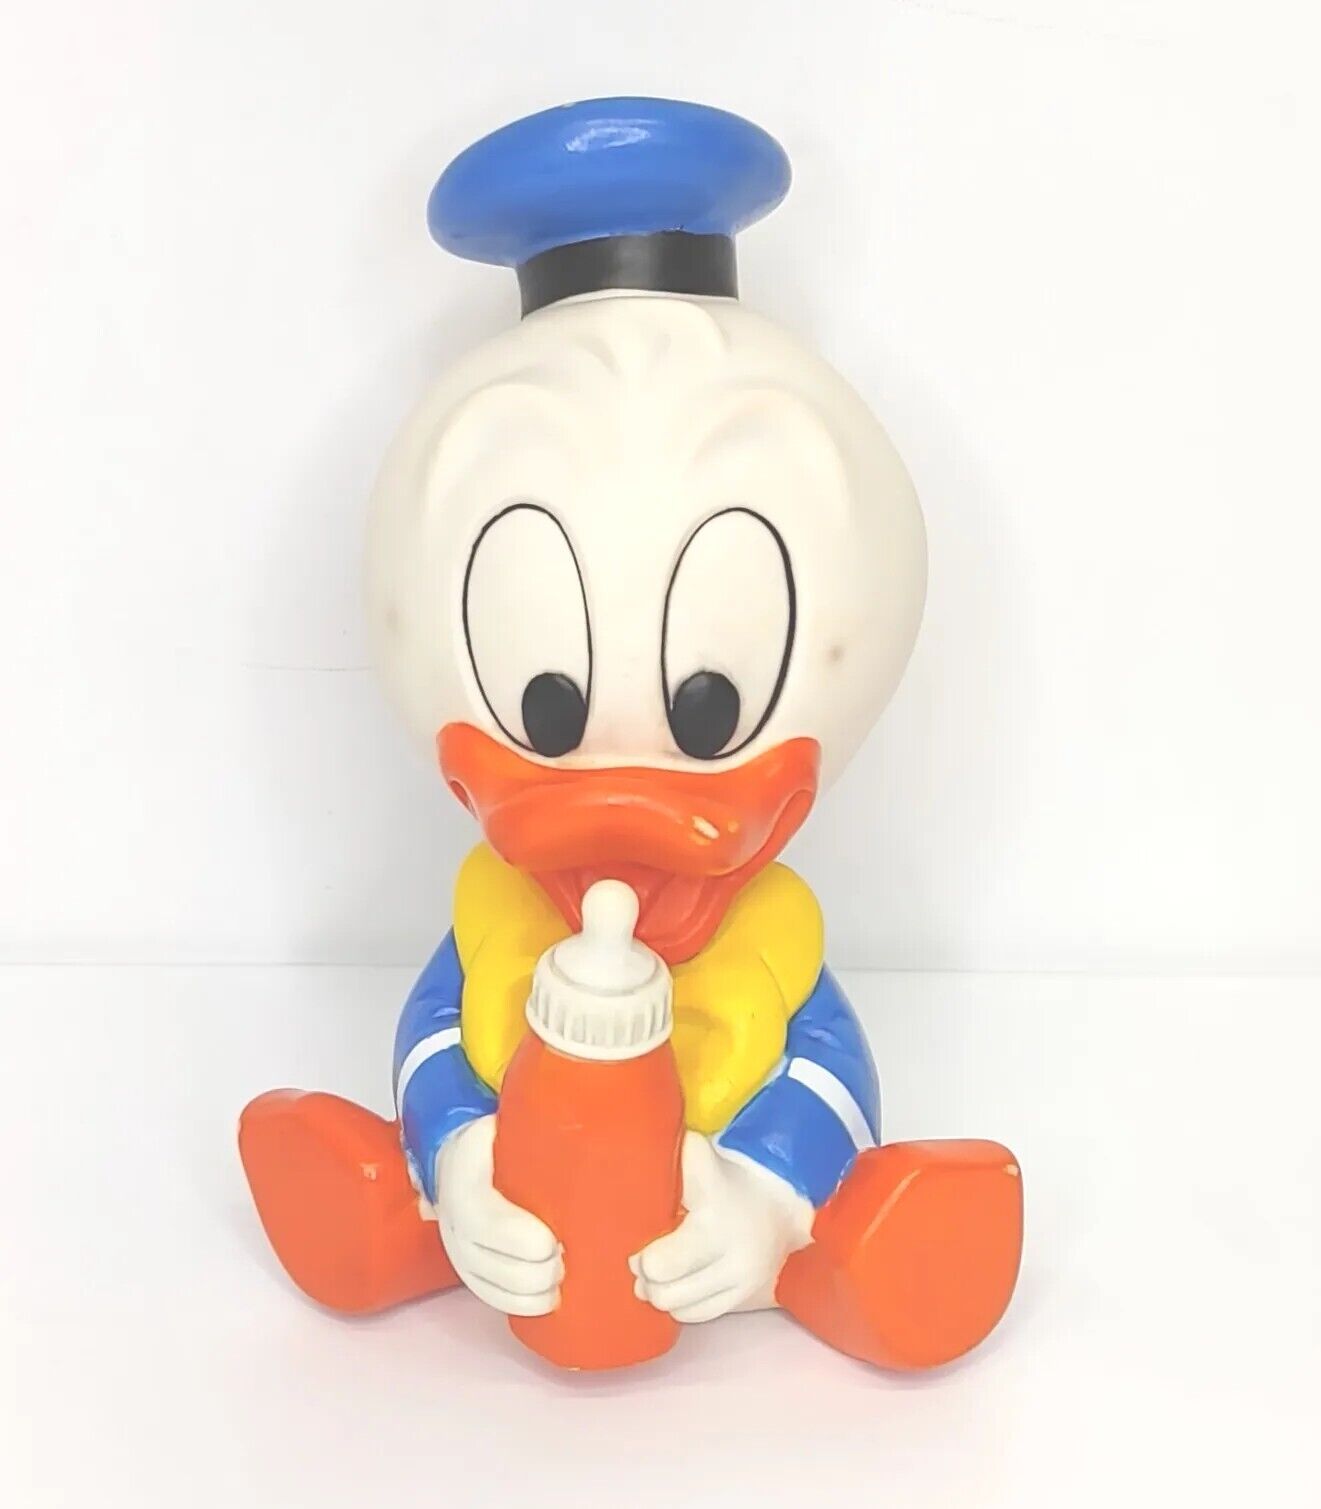 Vintage Baby Donald Duck Toy 80's Rubber Squeaker By Shelcore Disney